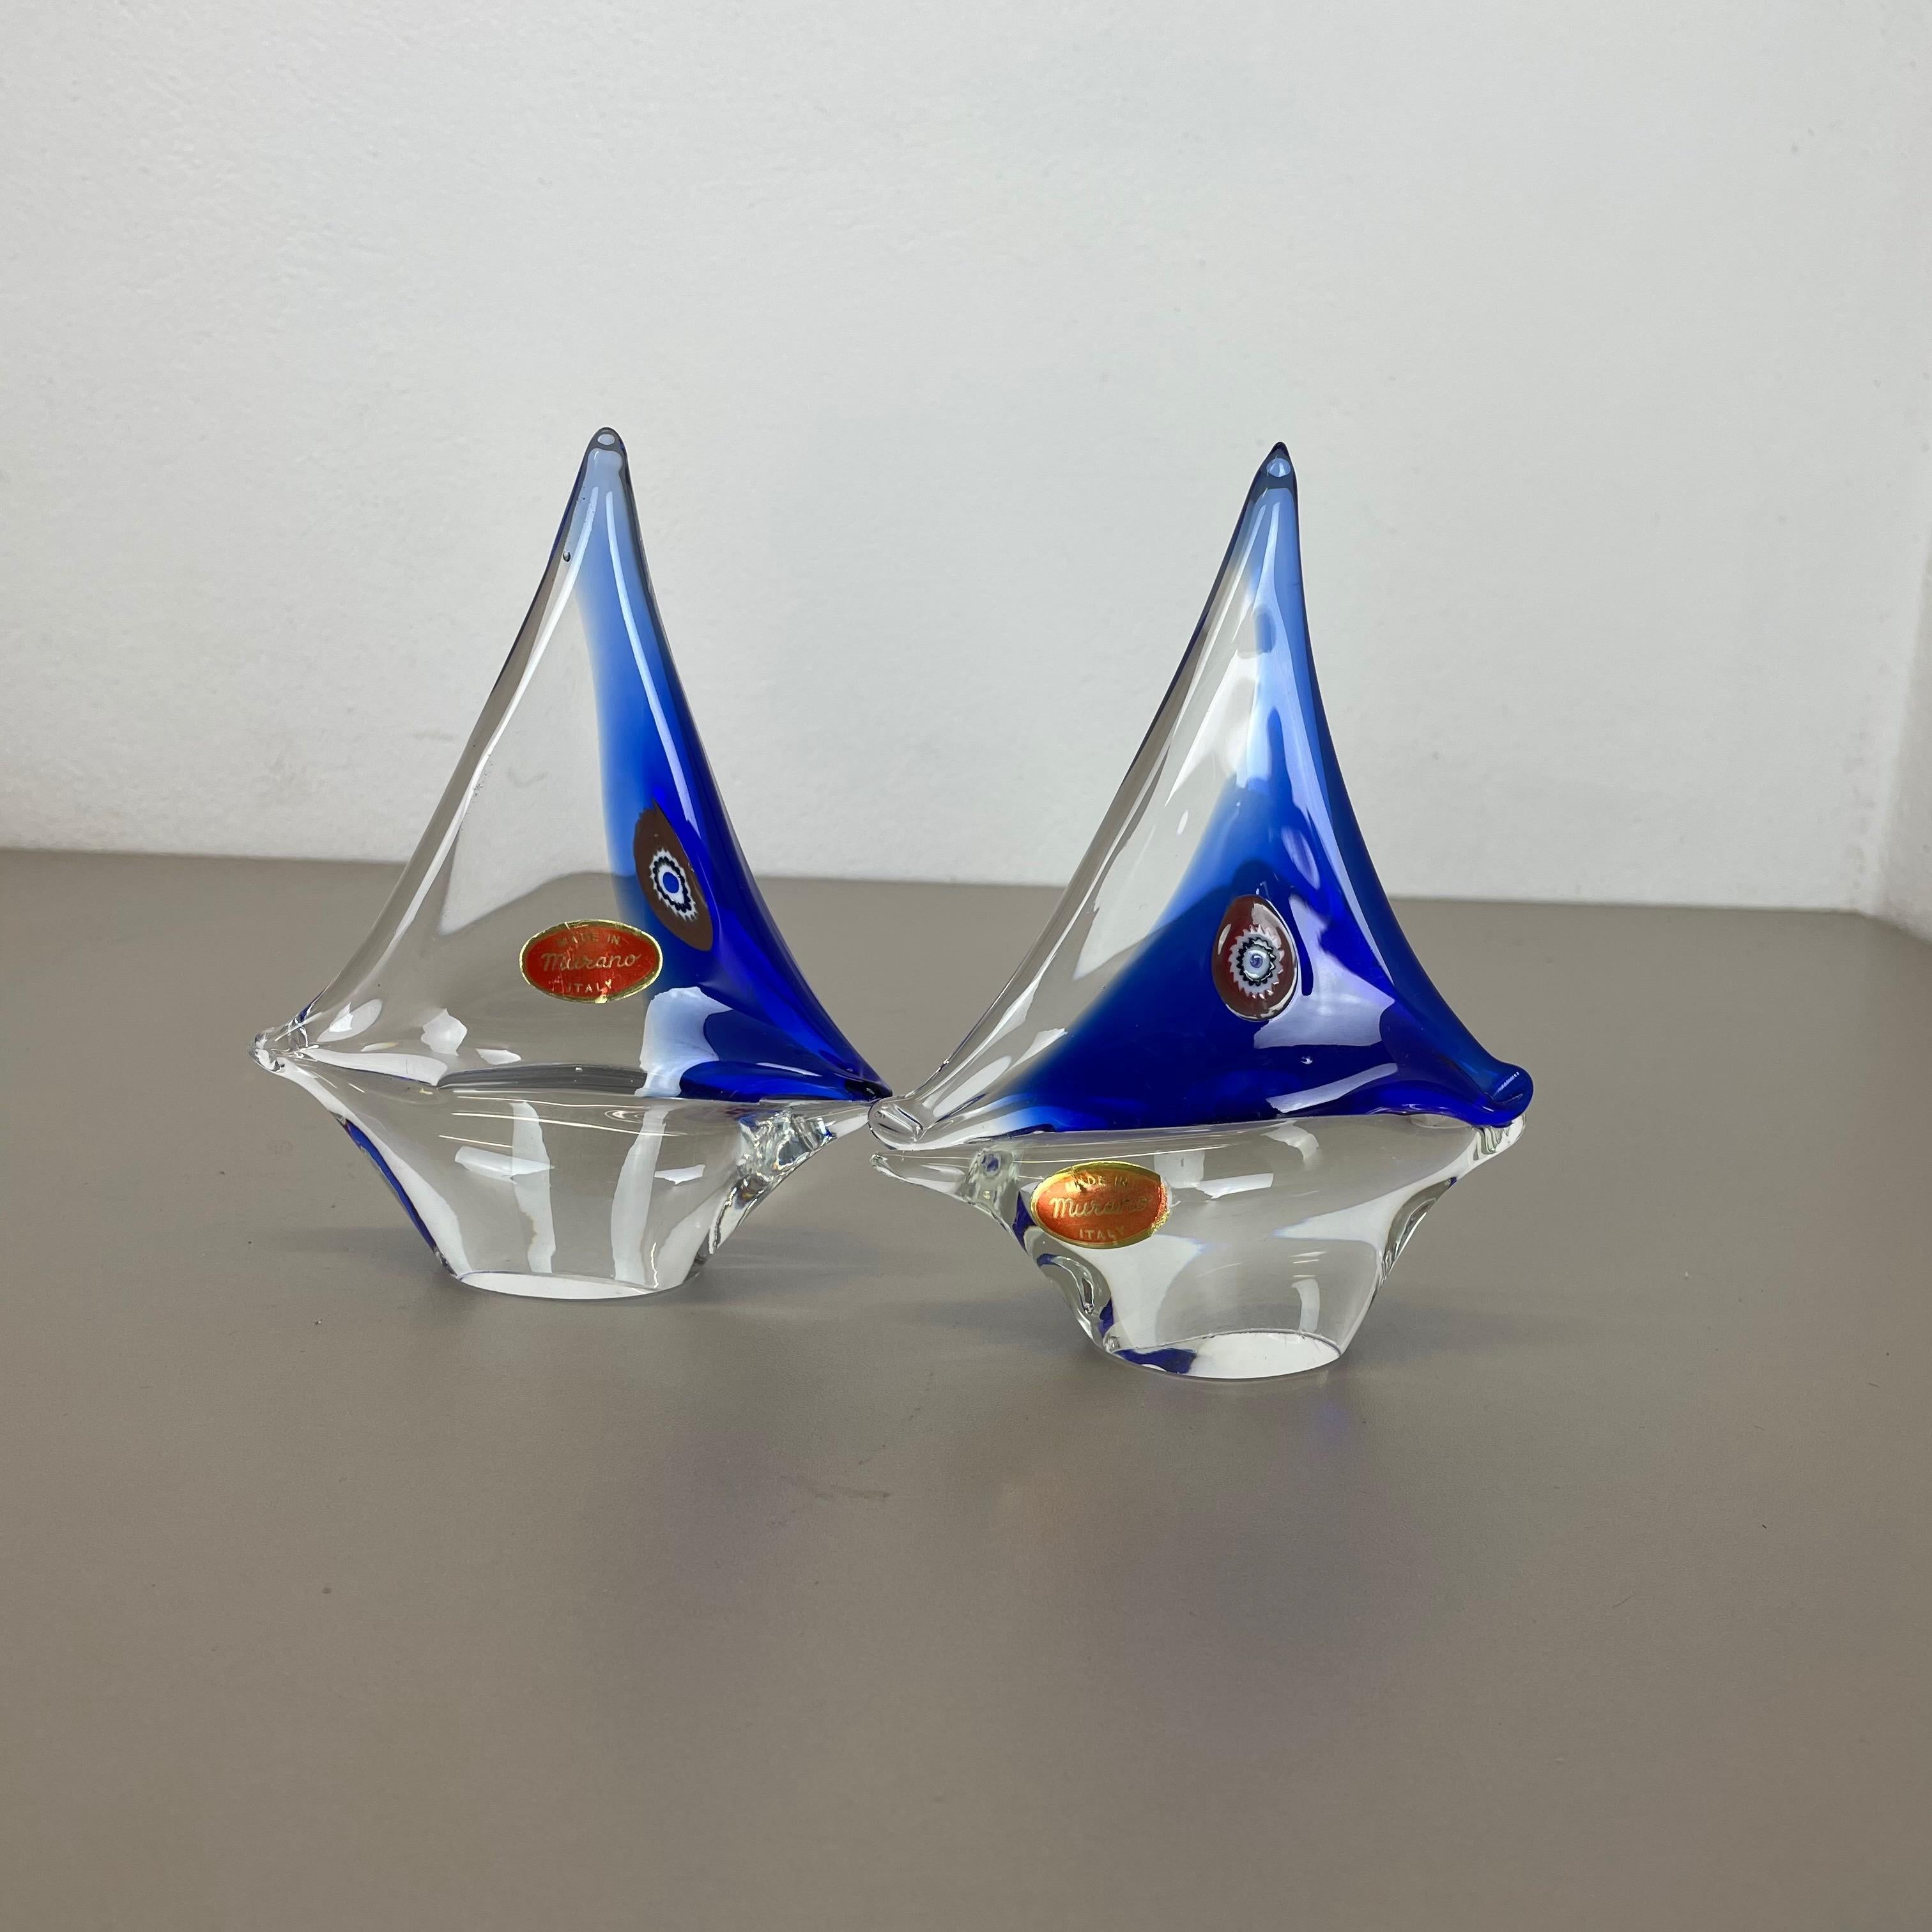 Mid-Century Modern Set of 2 Murano Glass Sailing Boats Ship Elements, Murano, Italy 1970 For Sale